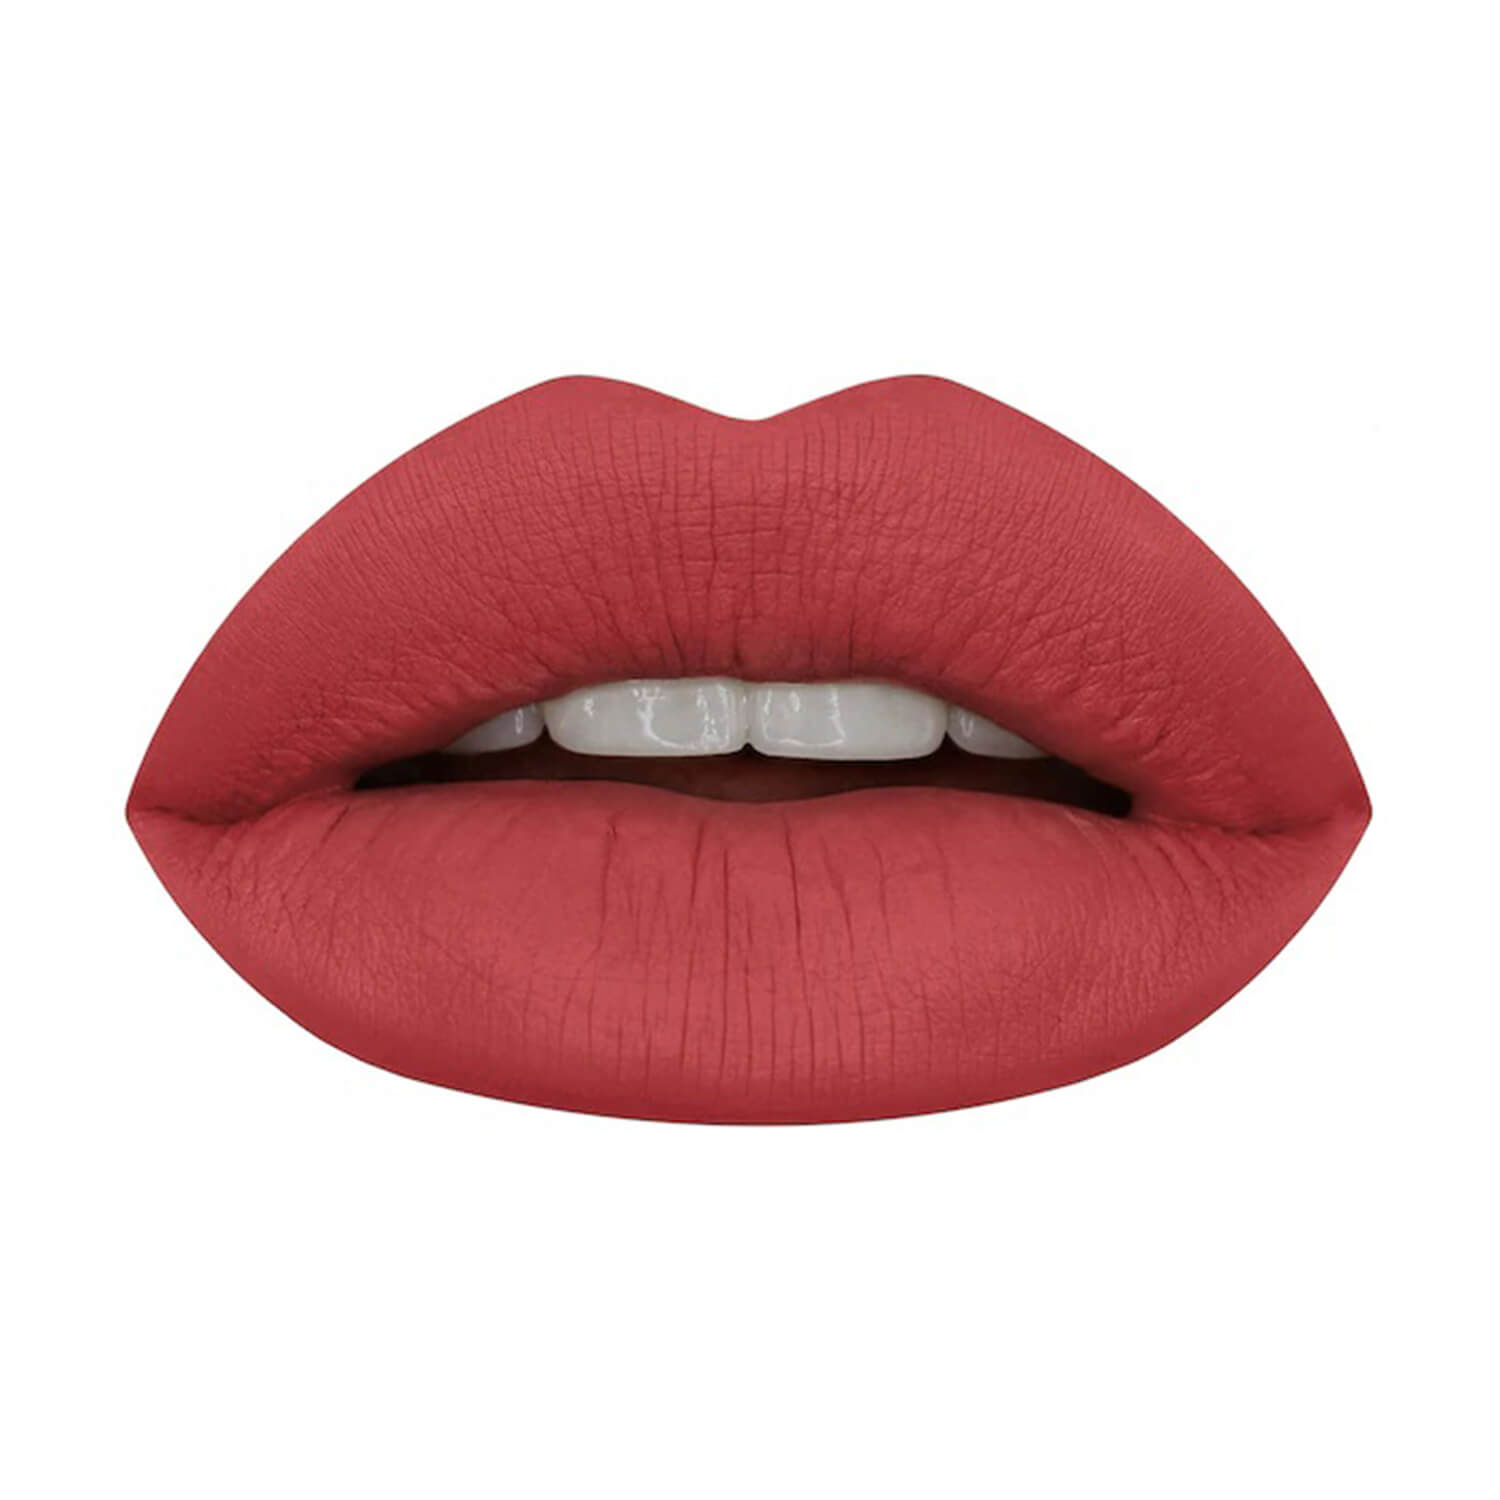 swatch image of Huda Beauty liquid lipstick in icon shade available at Heygirl.pk for delivery in Pakistan